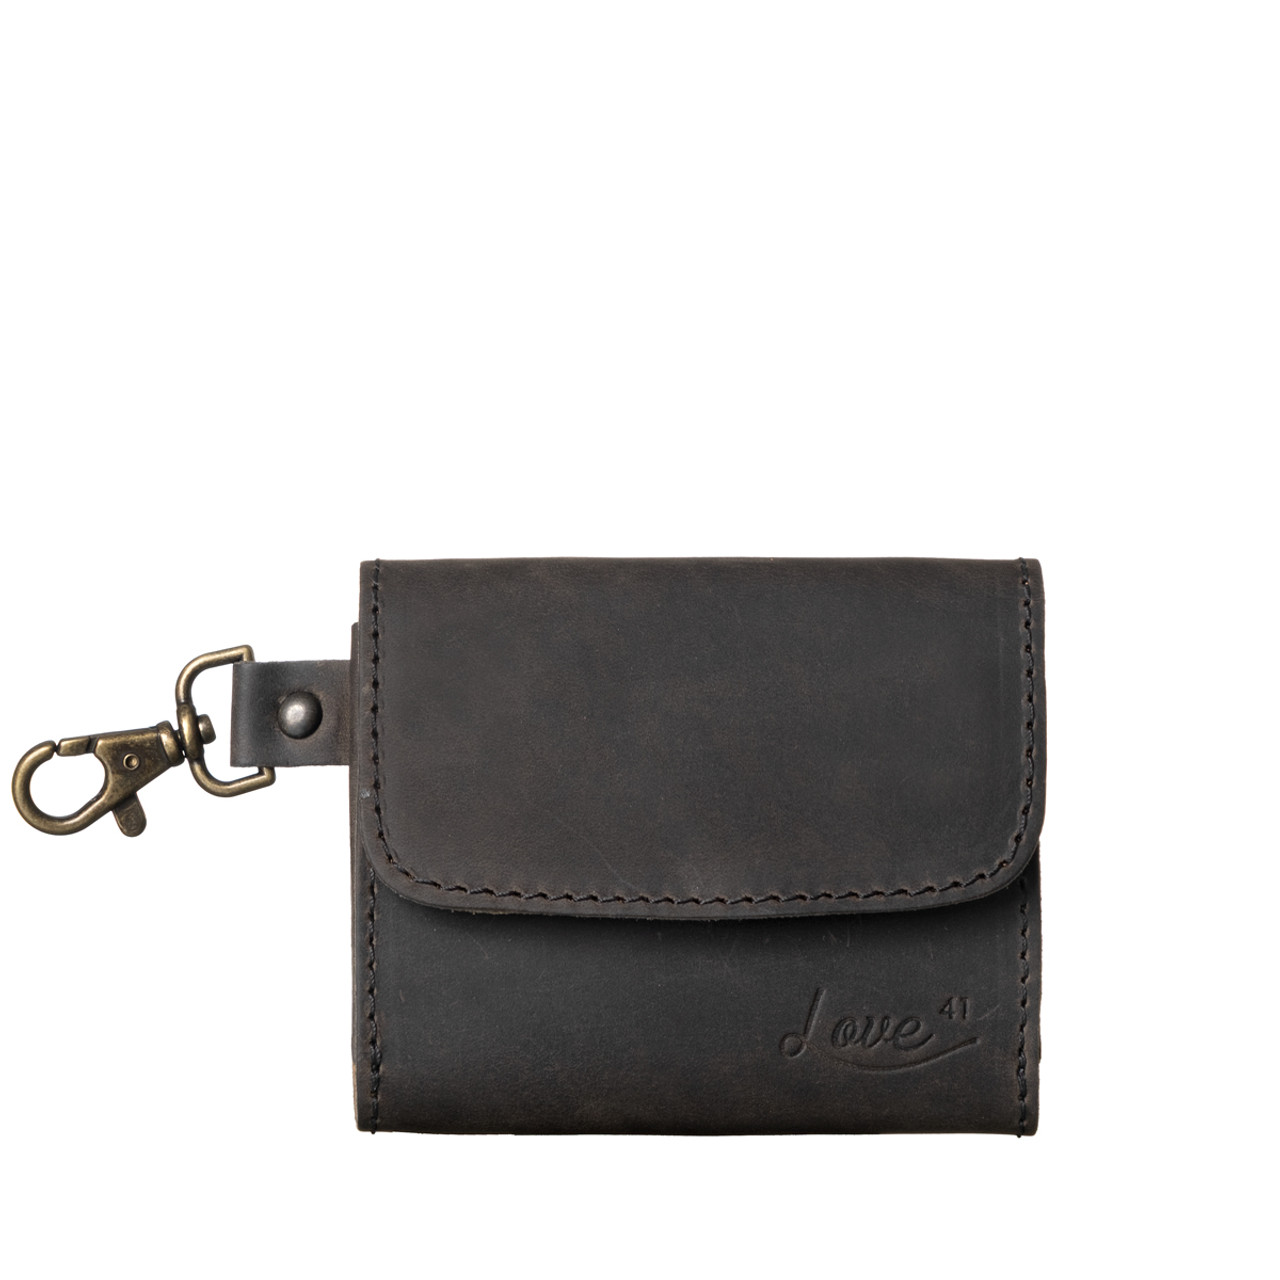 PU Leather Coin Purse Wallet With Coin Sorter - My Charity Boxes